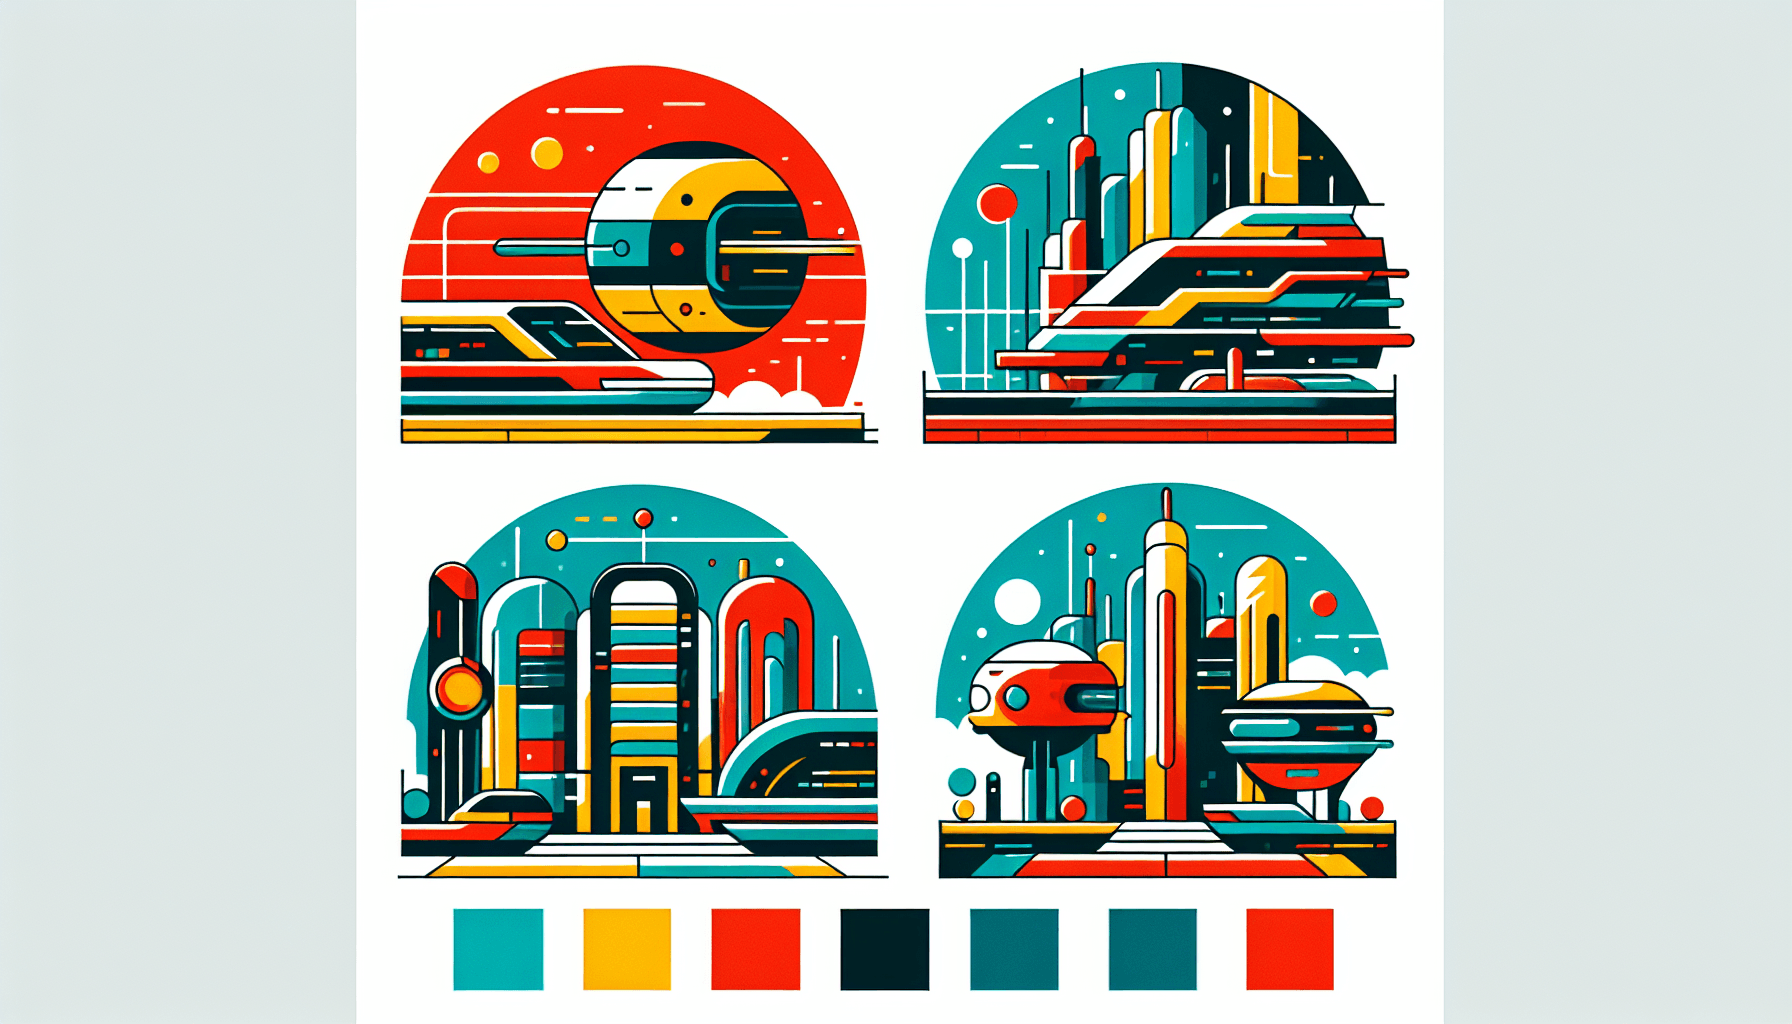 Futuristic in flat illustration style and white background, red #f47574, green #88c7a8, yellow #fcc44b, and blue #645bc8 colors.